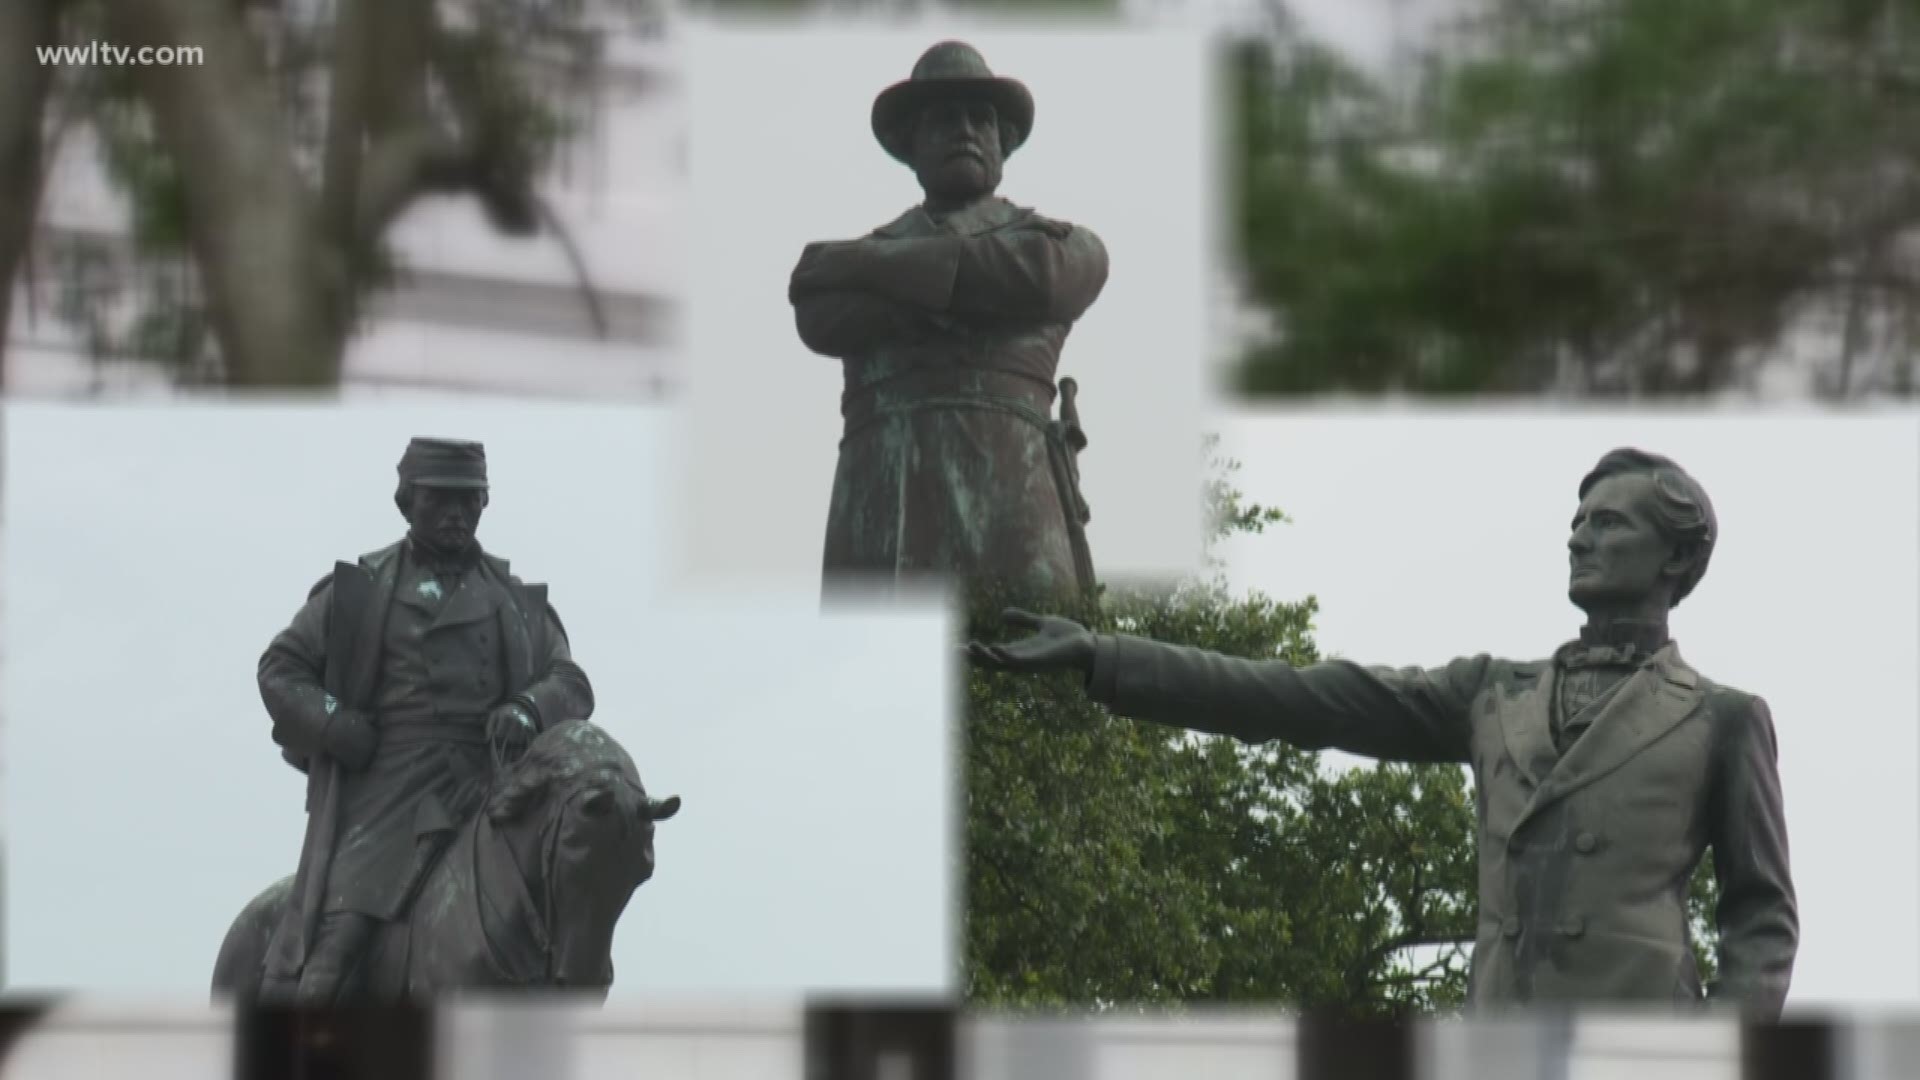 A working group was set up to advise Mayor elect LaToya Cantrell on the fate of the monuments.